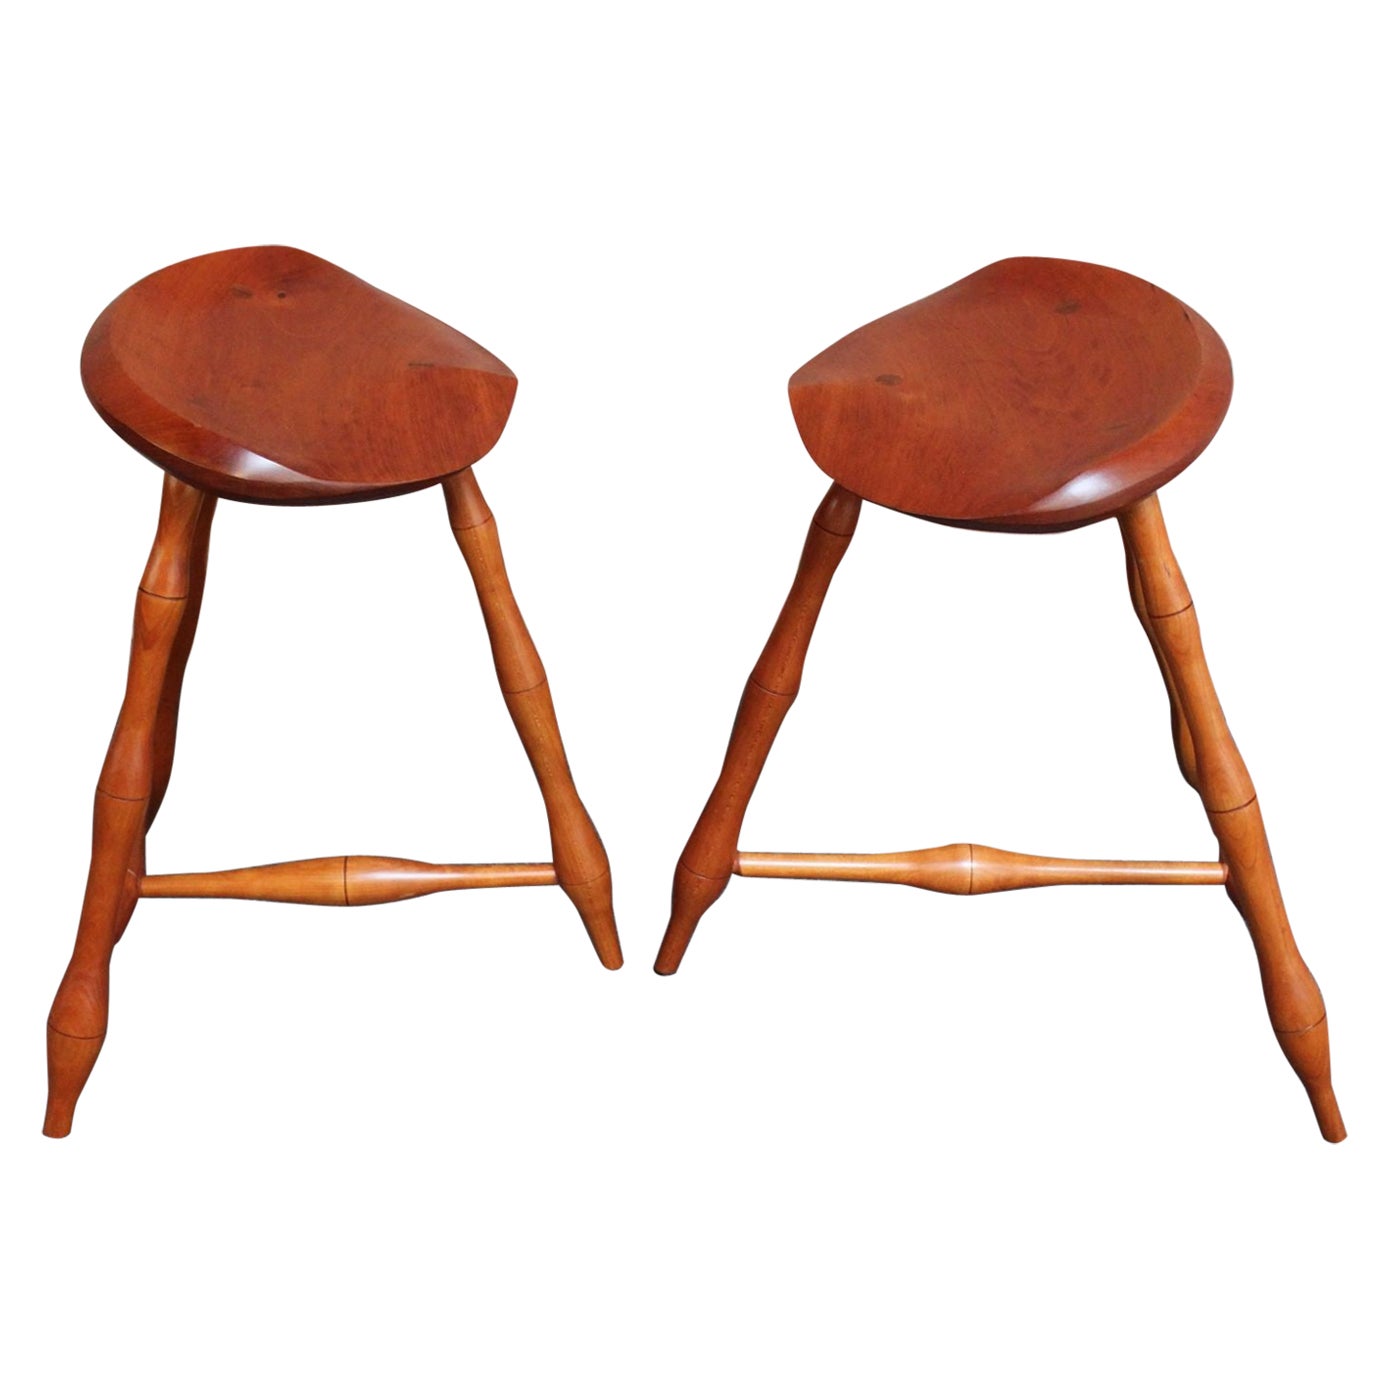 Pair of Vintage Studio Craft Windsor-Style Three Legged Low Stools in Cherrywood For Sale